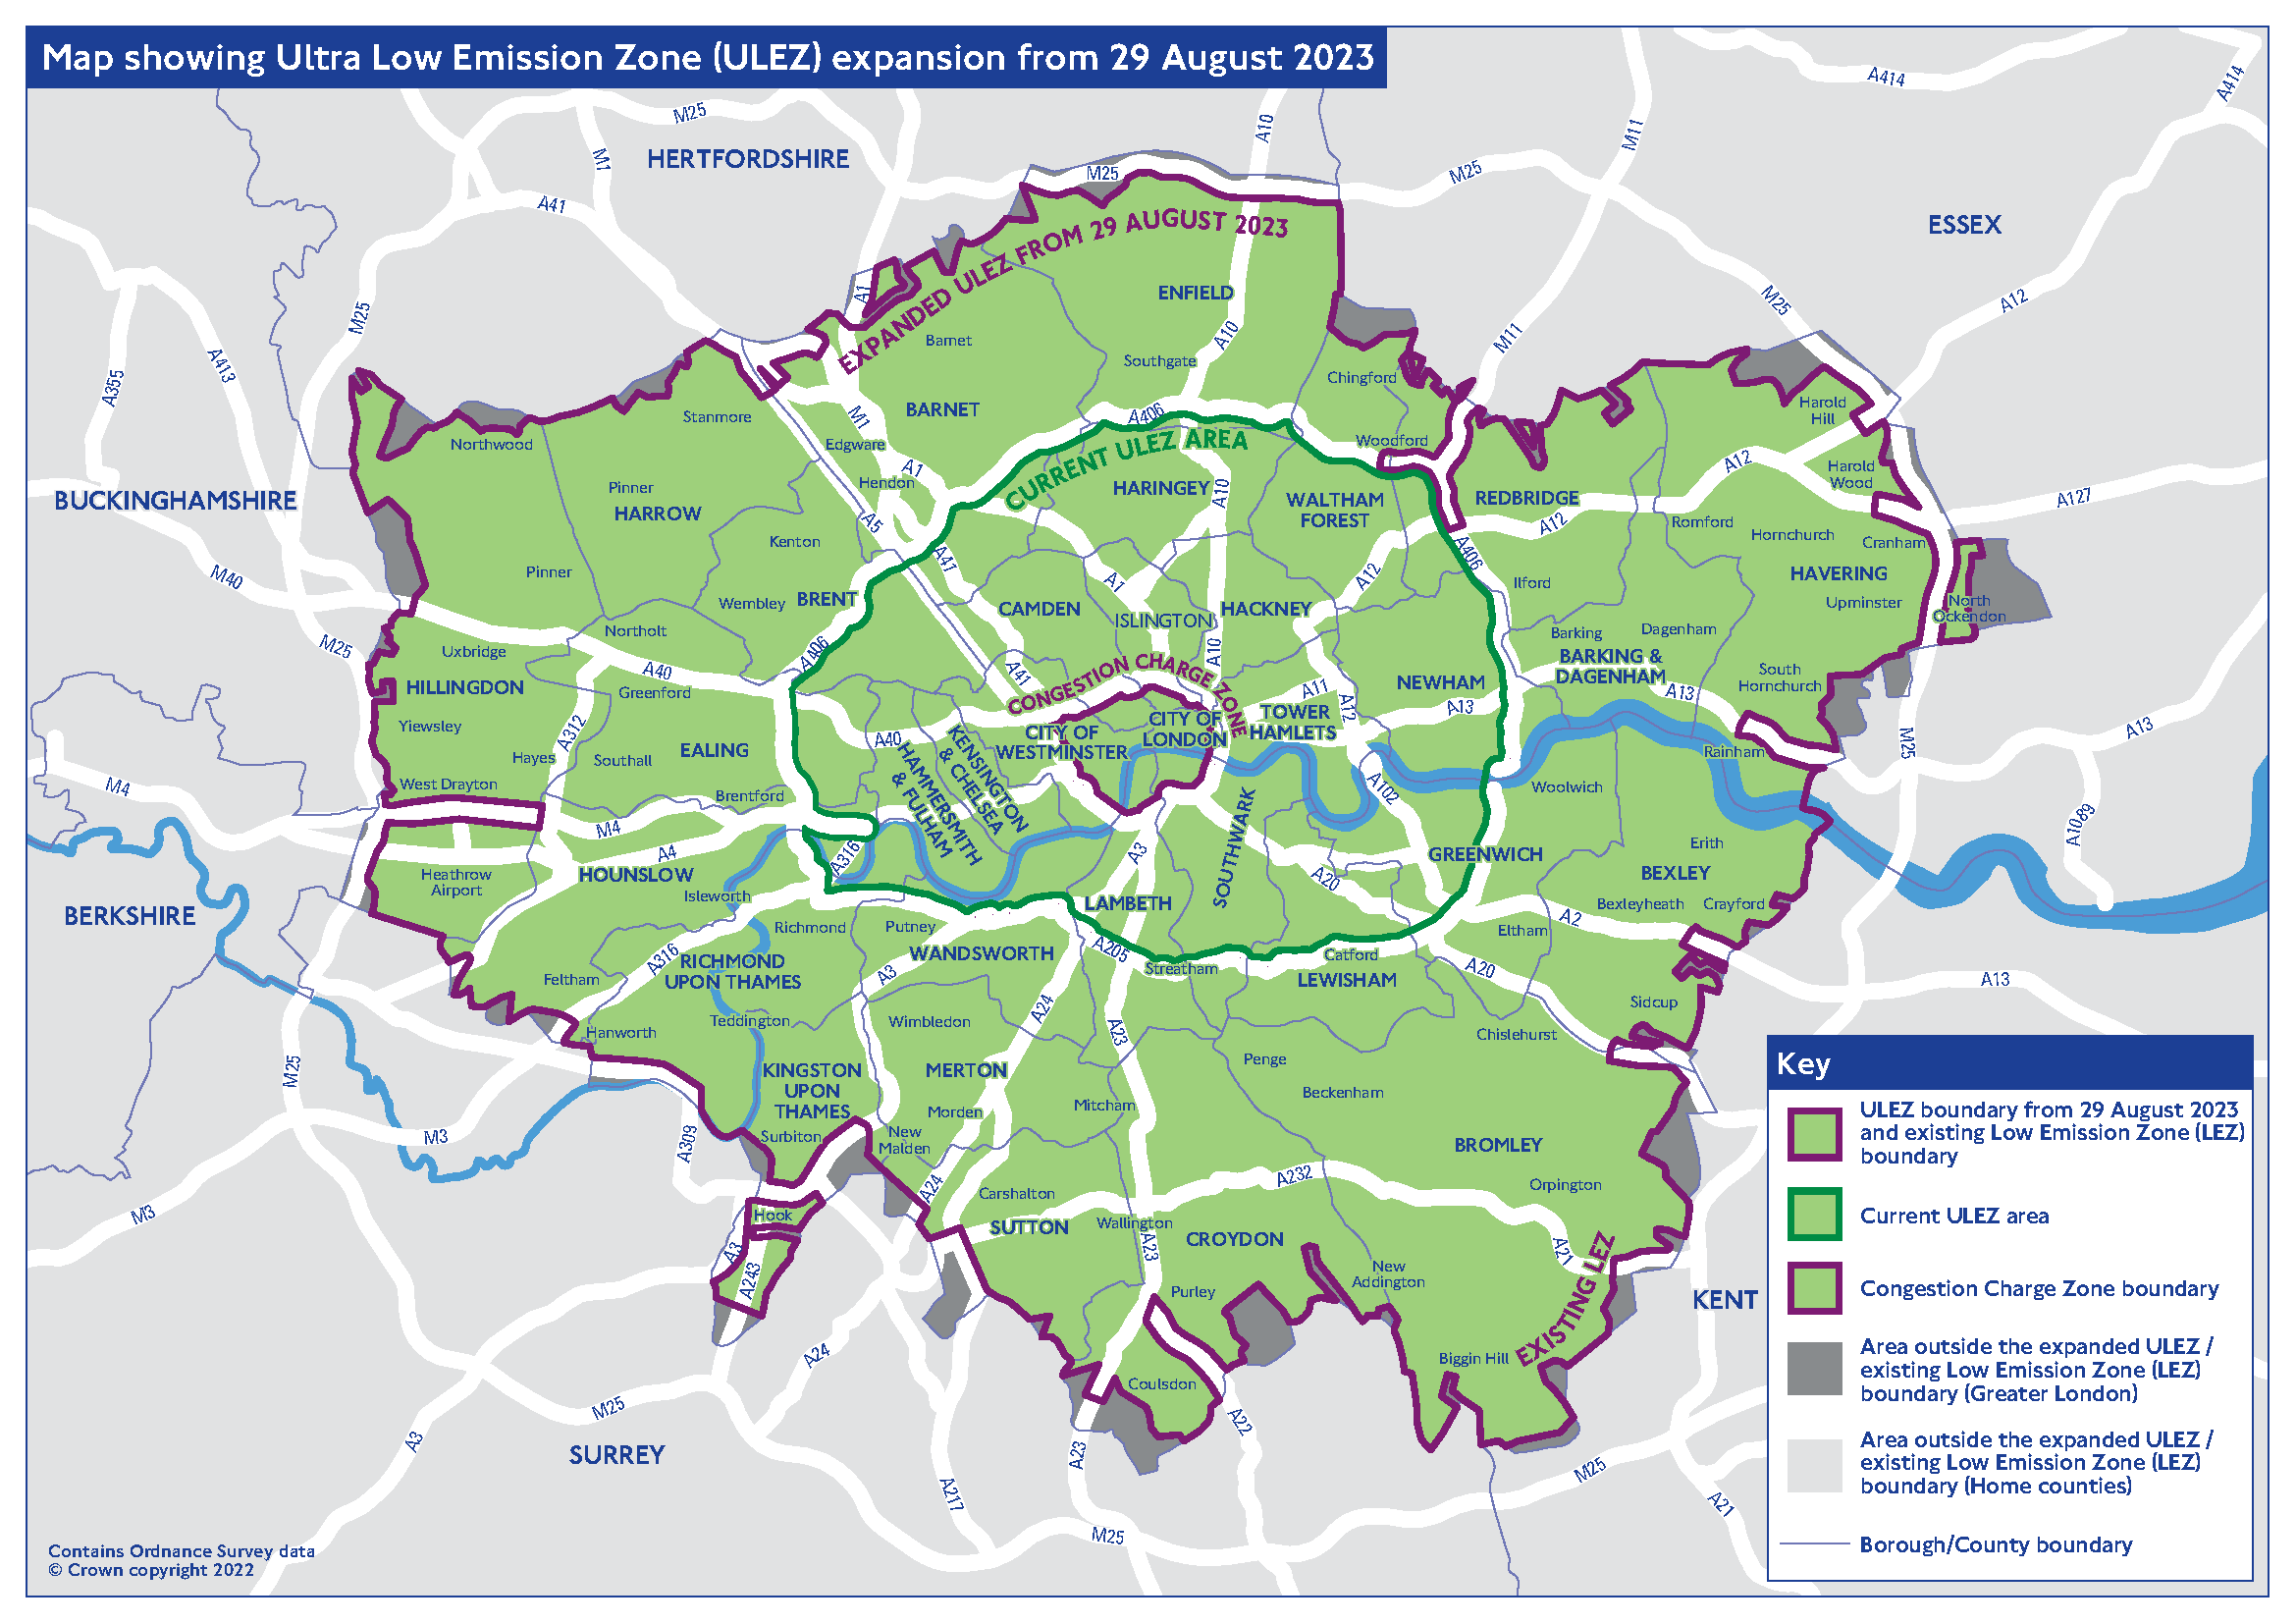 London ULEZ expansion ultimate guide for small businesses